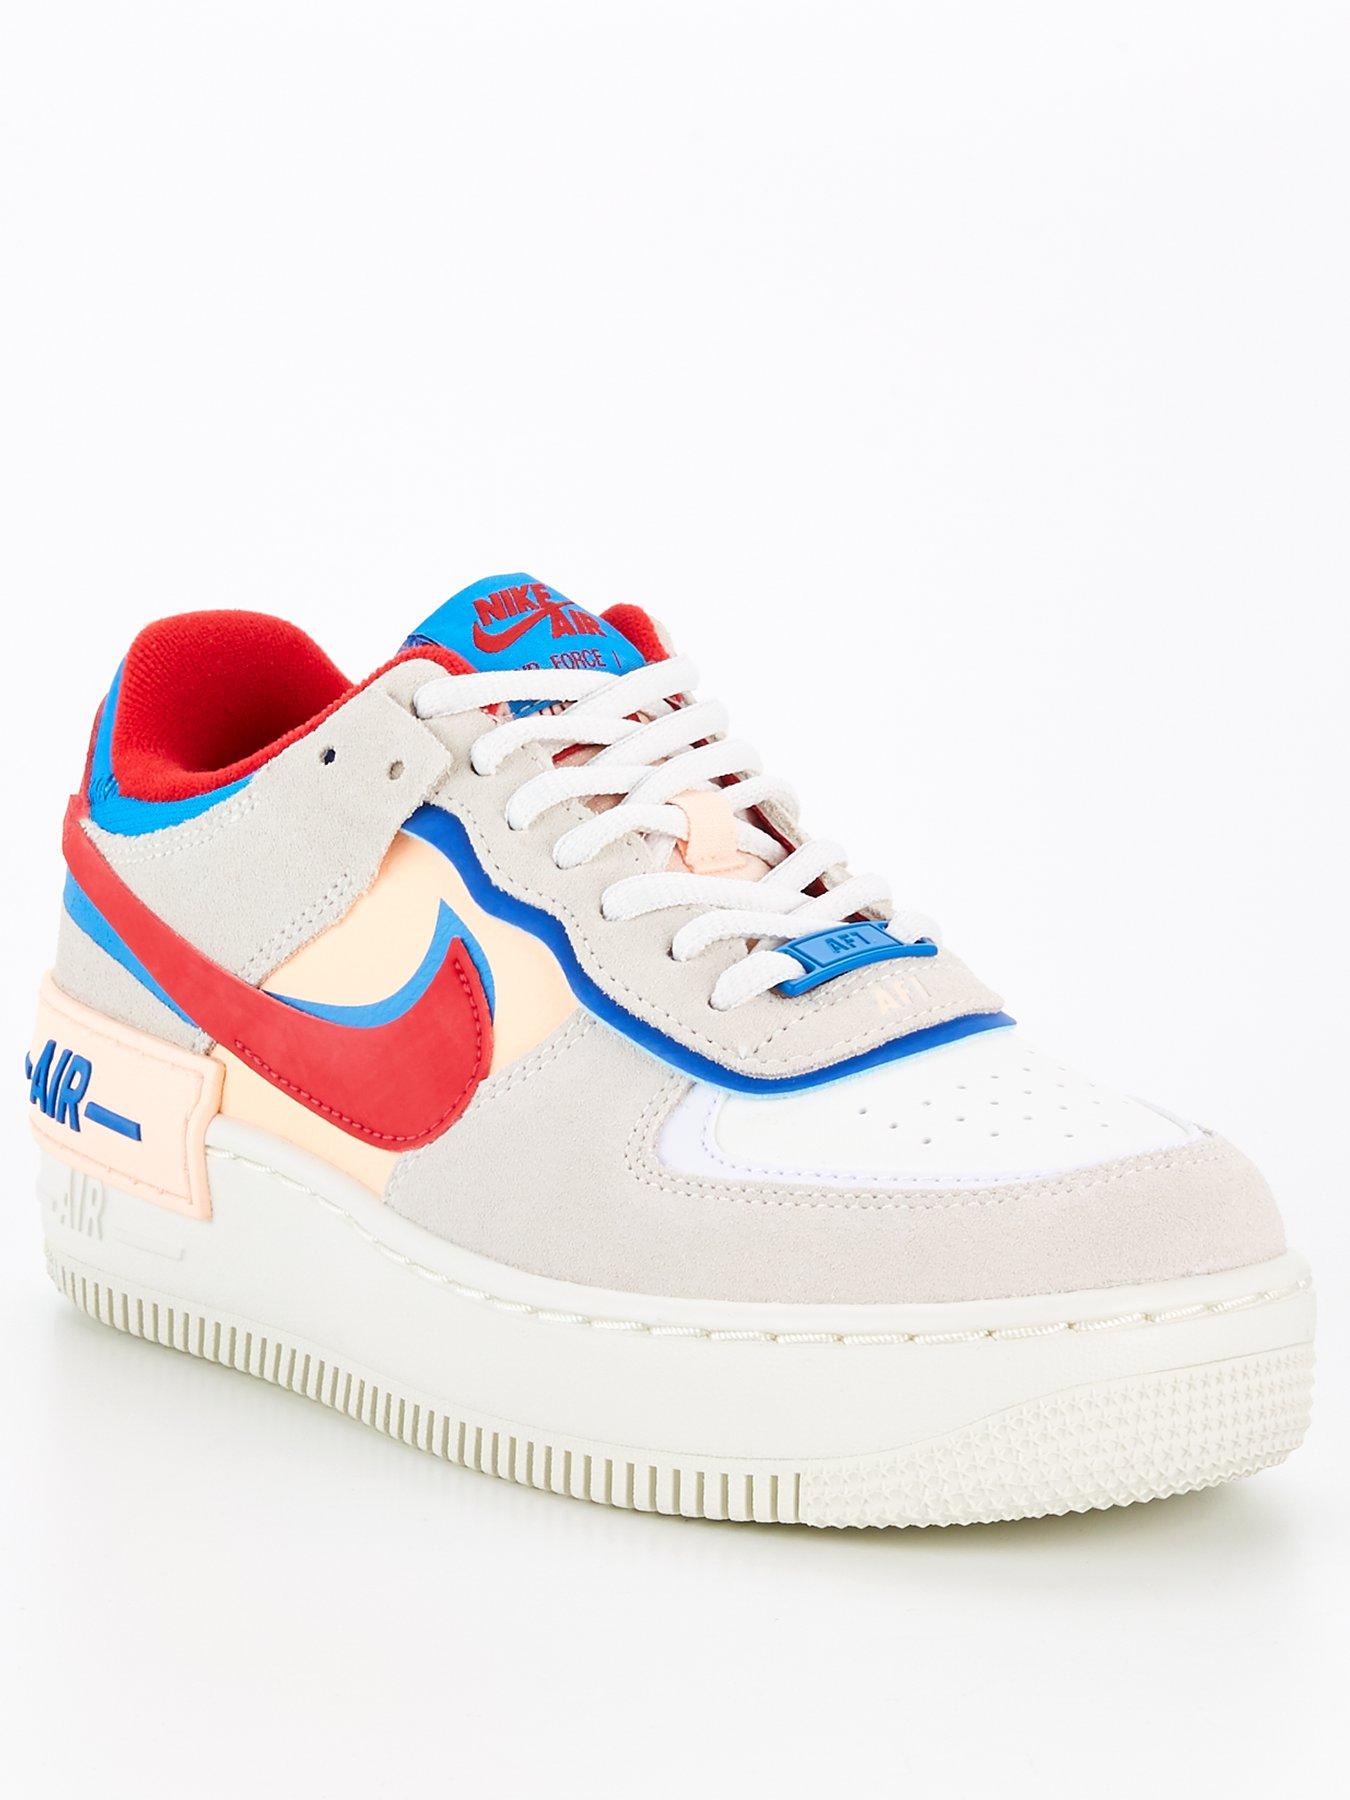 littlewoods nike air force